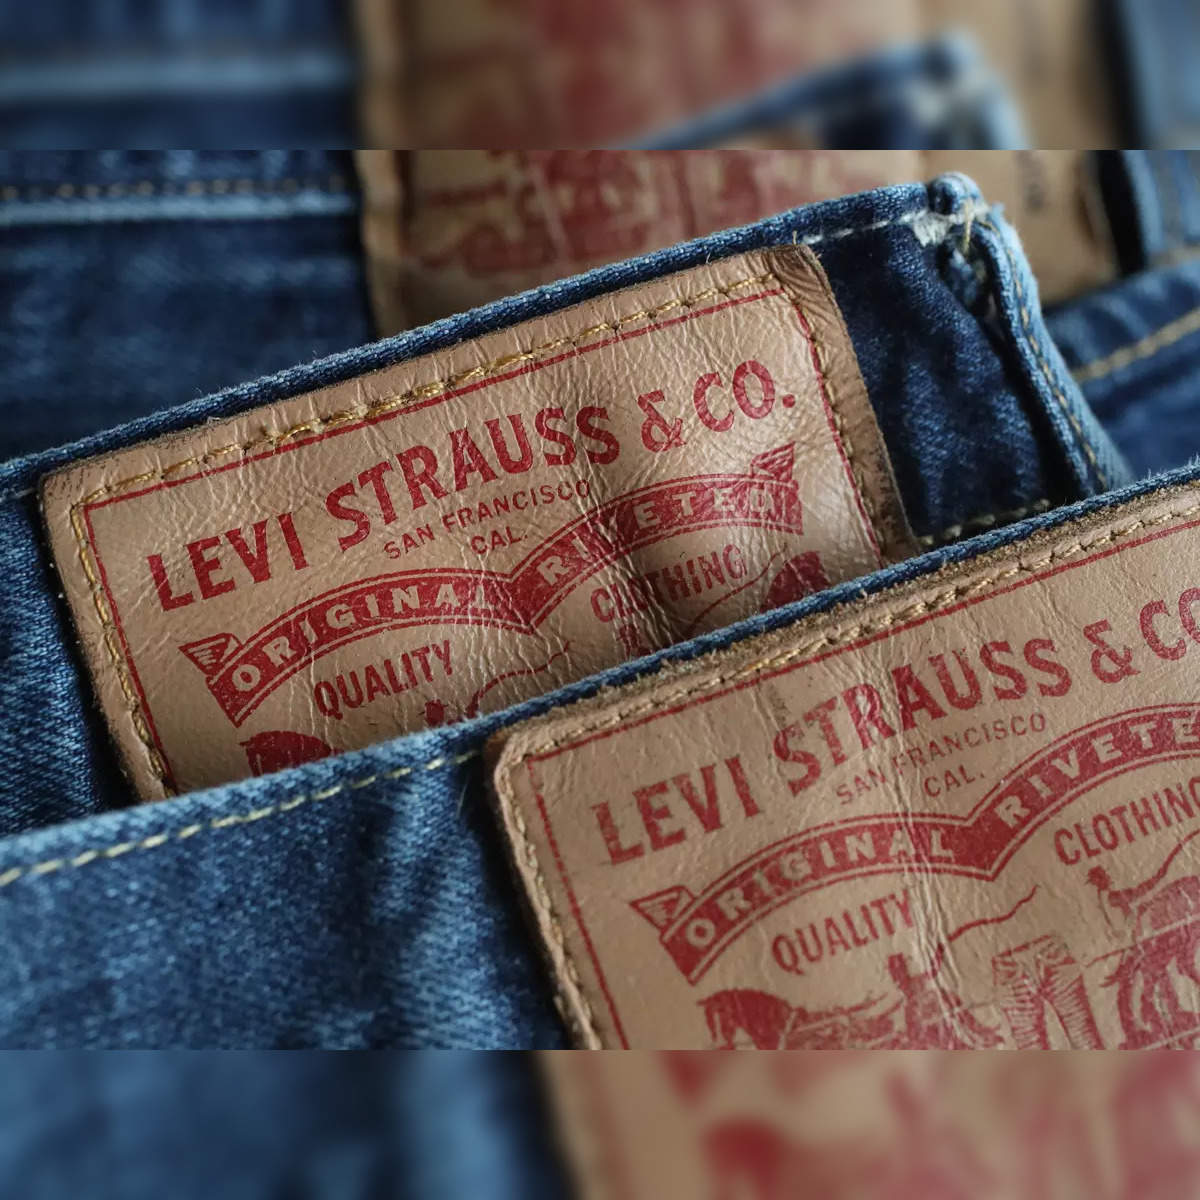 Searching the World for Levi's® - A Collector's Story - Levi